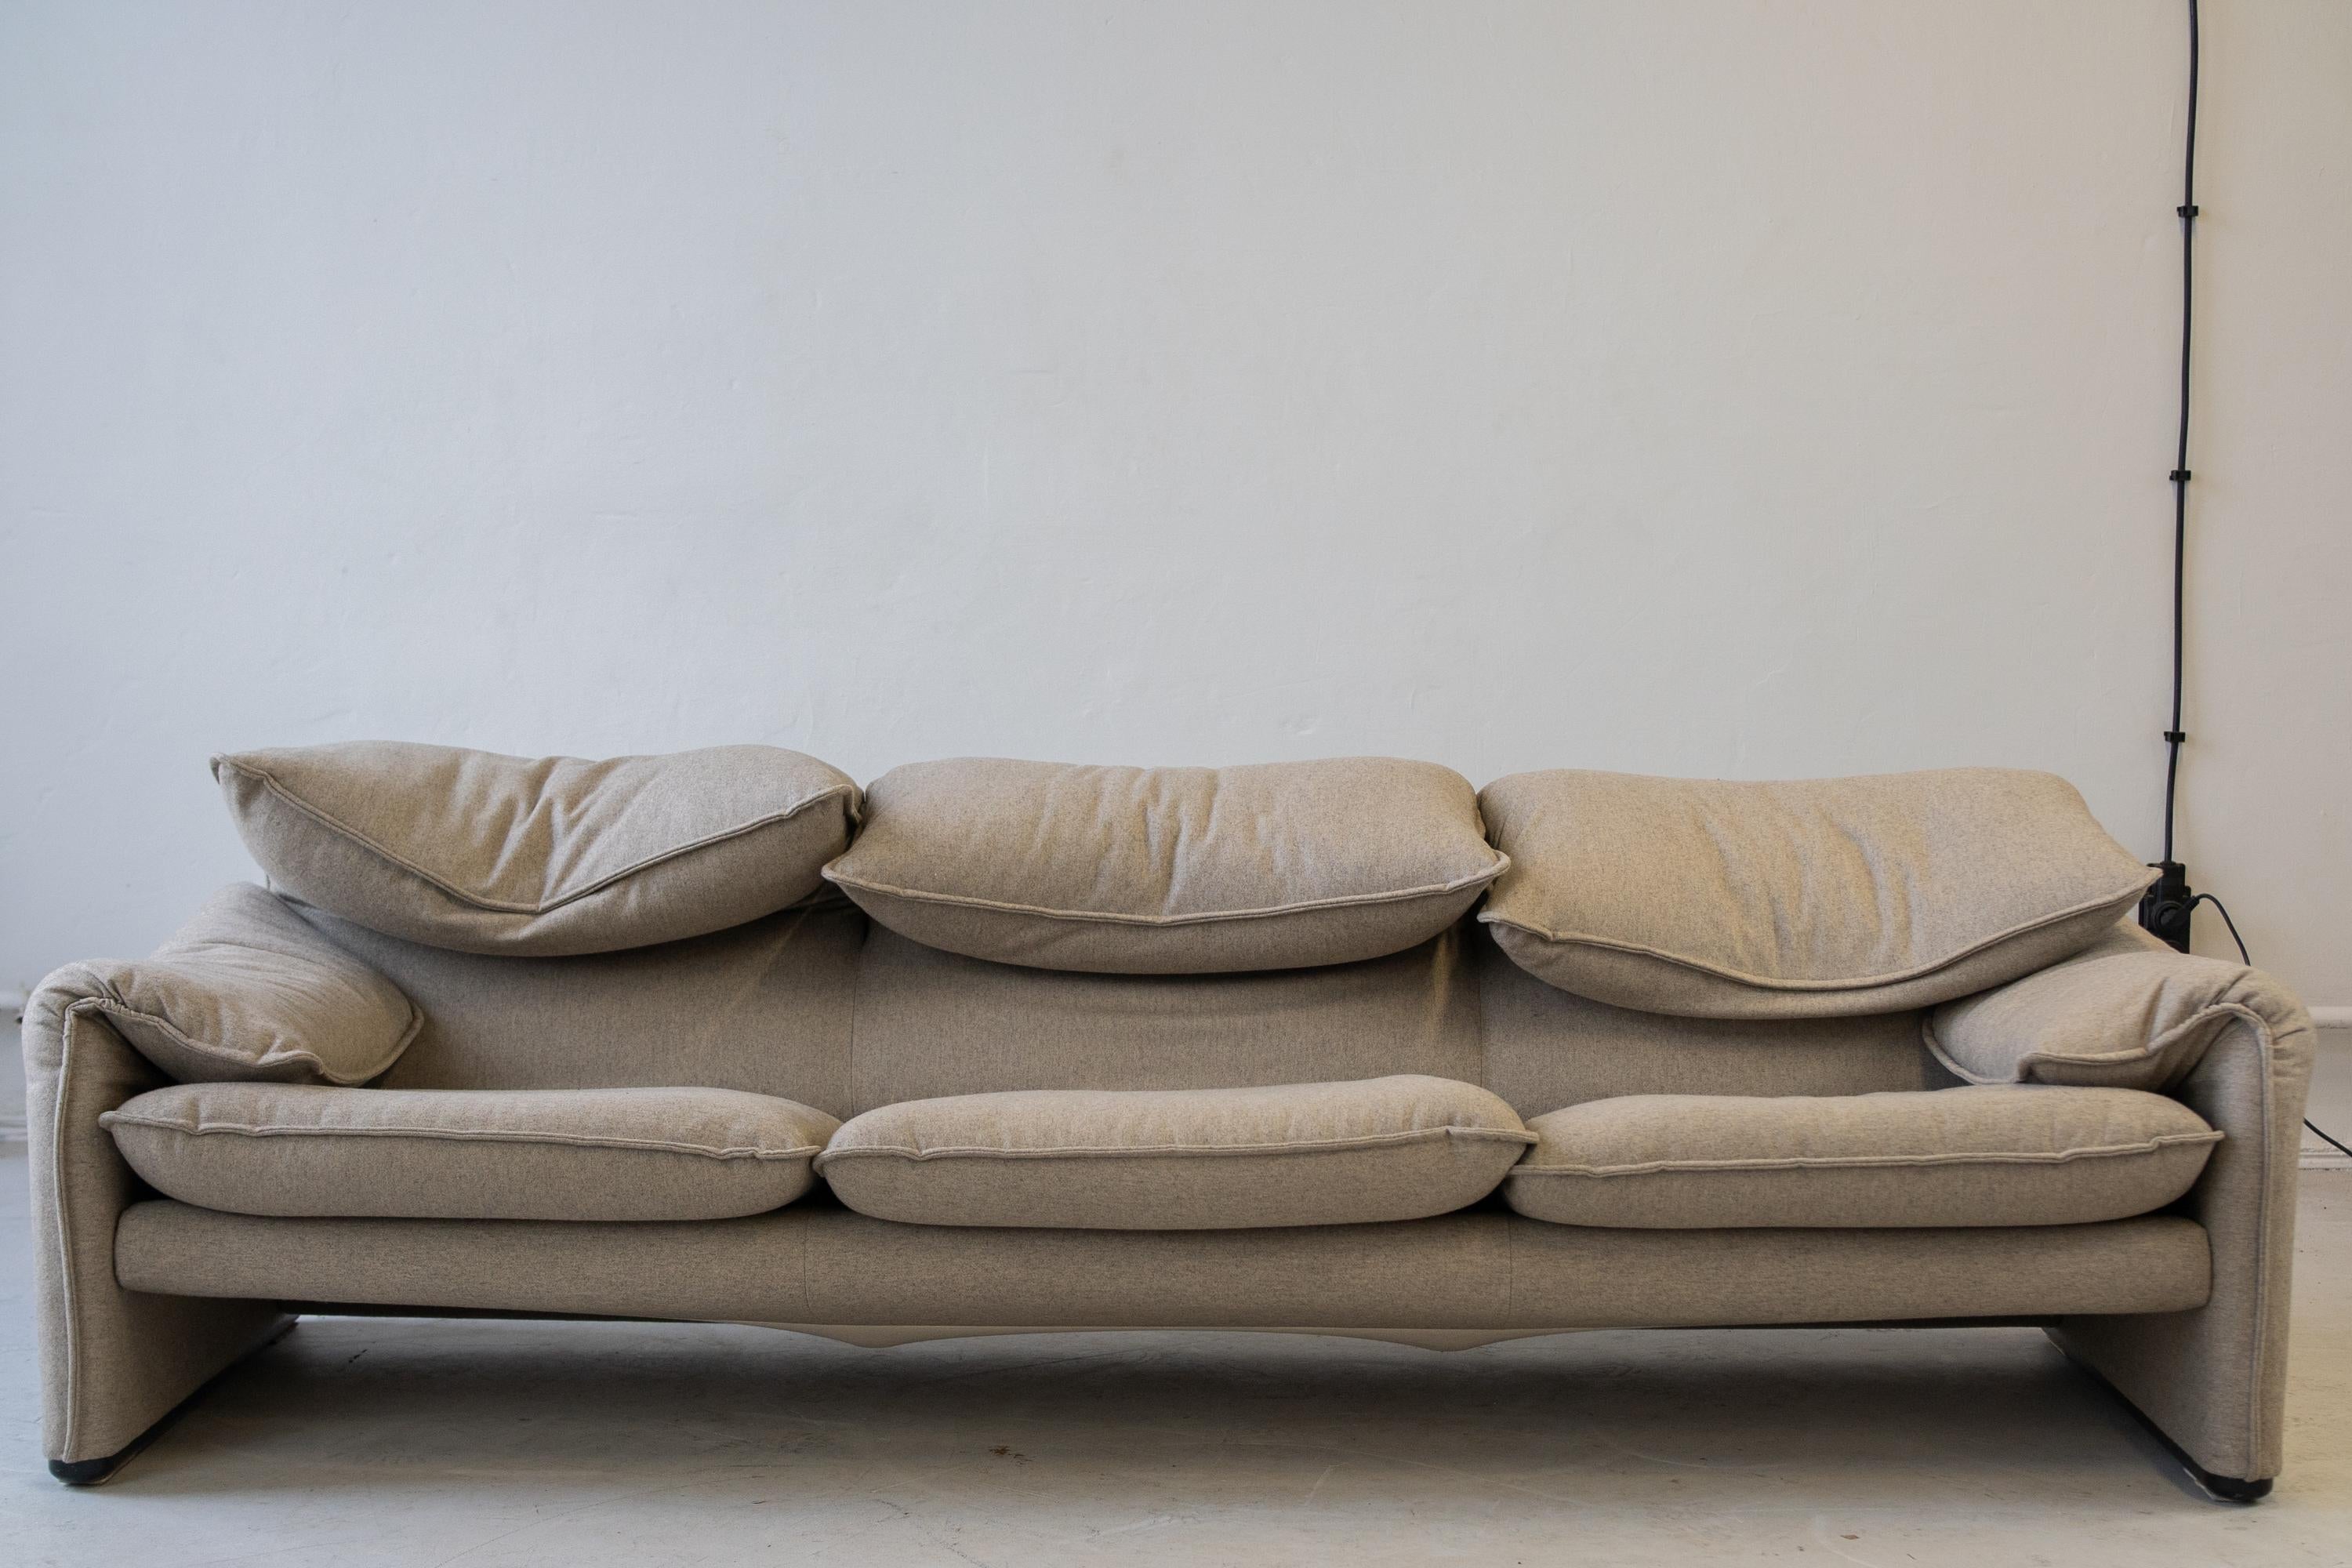 Sofa Maralunga by Vico Magistretti for Cassina, designed in 1973 in Italy.
Famous for its comfort and design. 
3 seater sofa reupholsterd with a grey fabric.